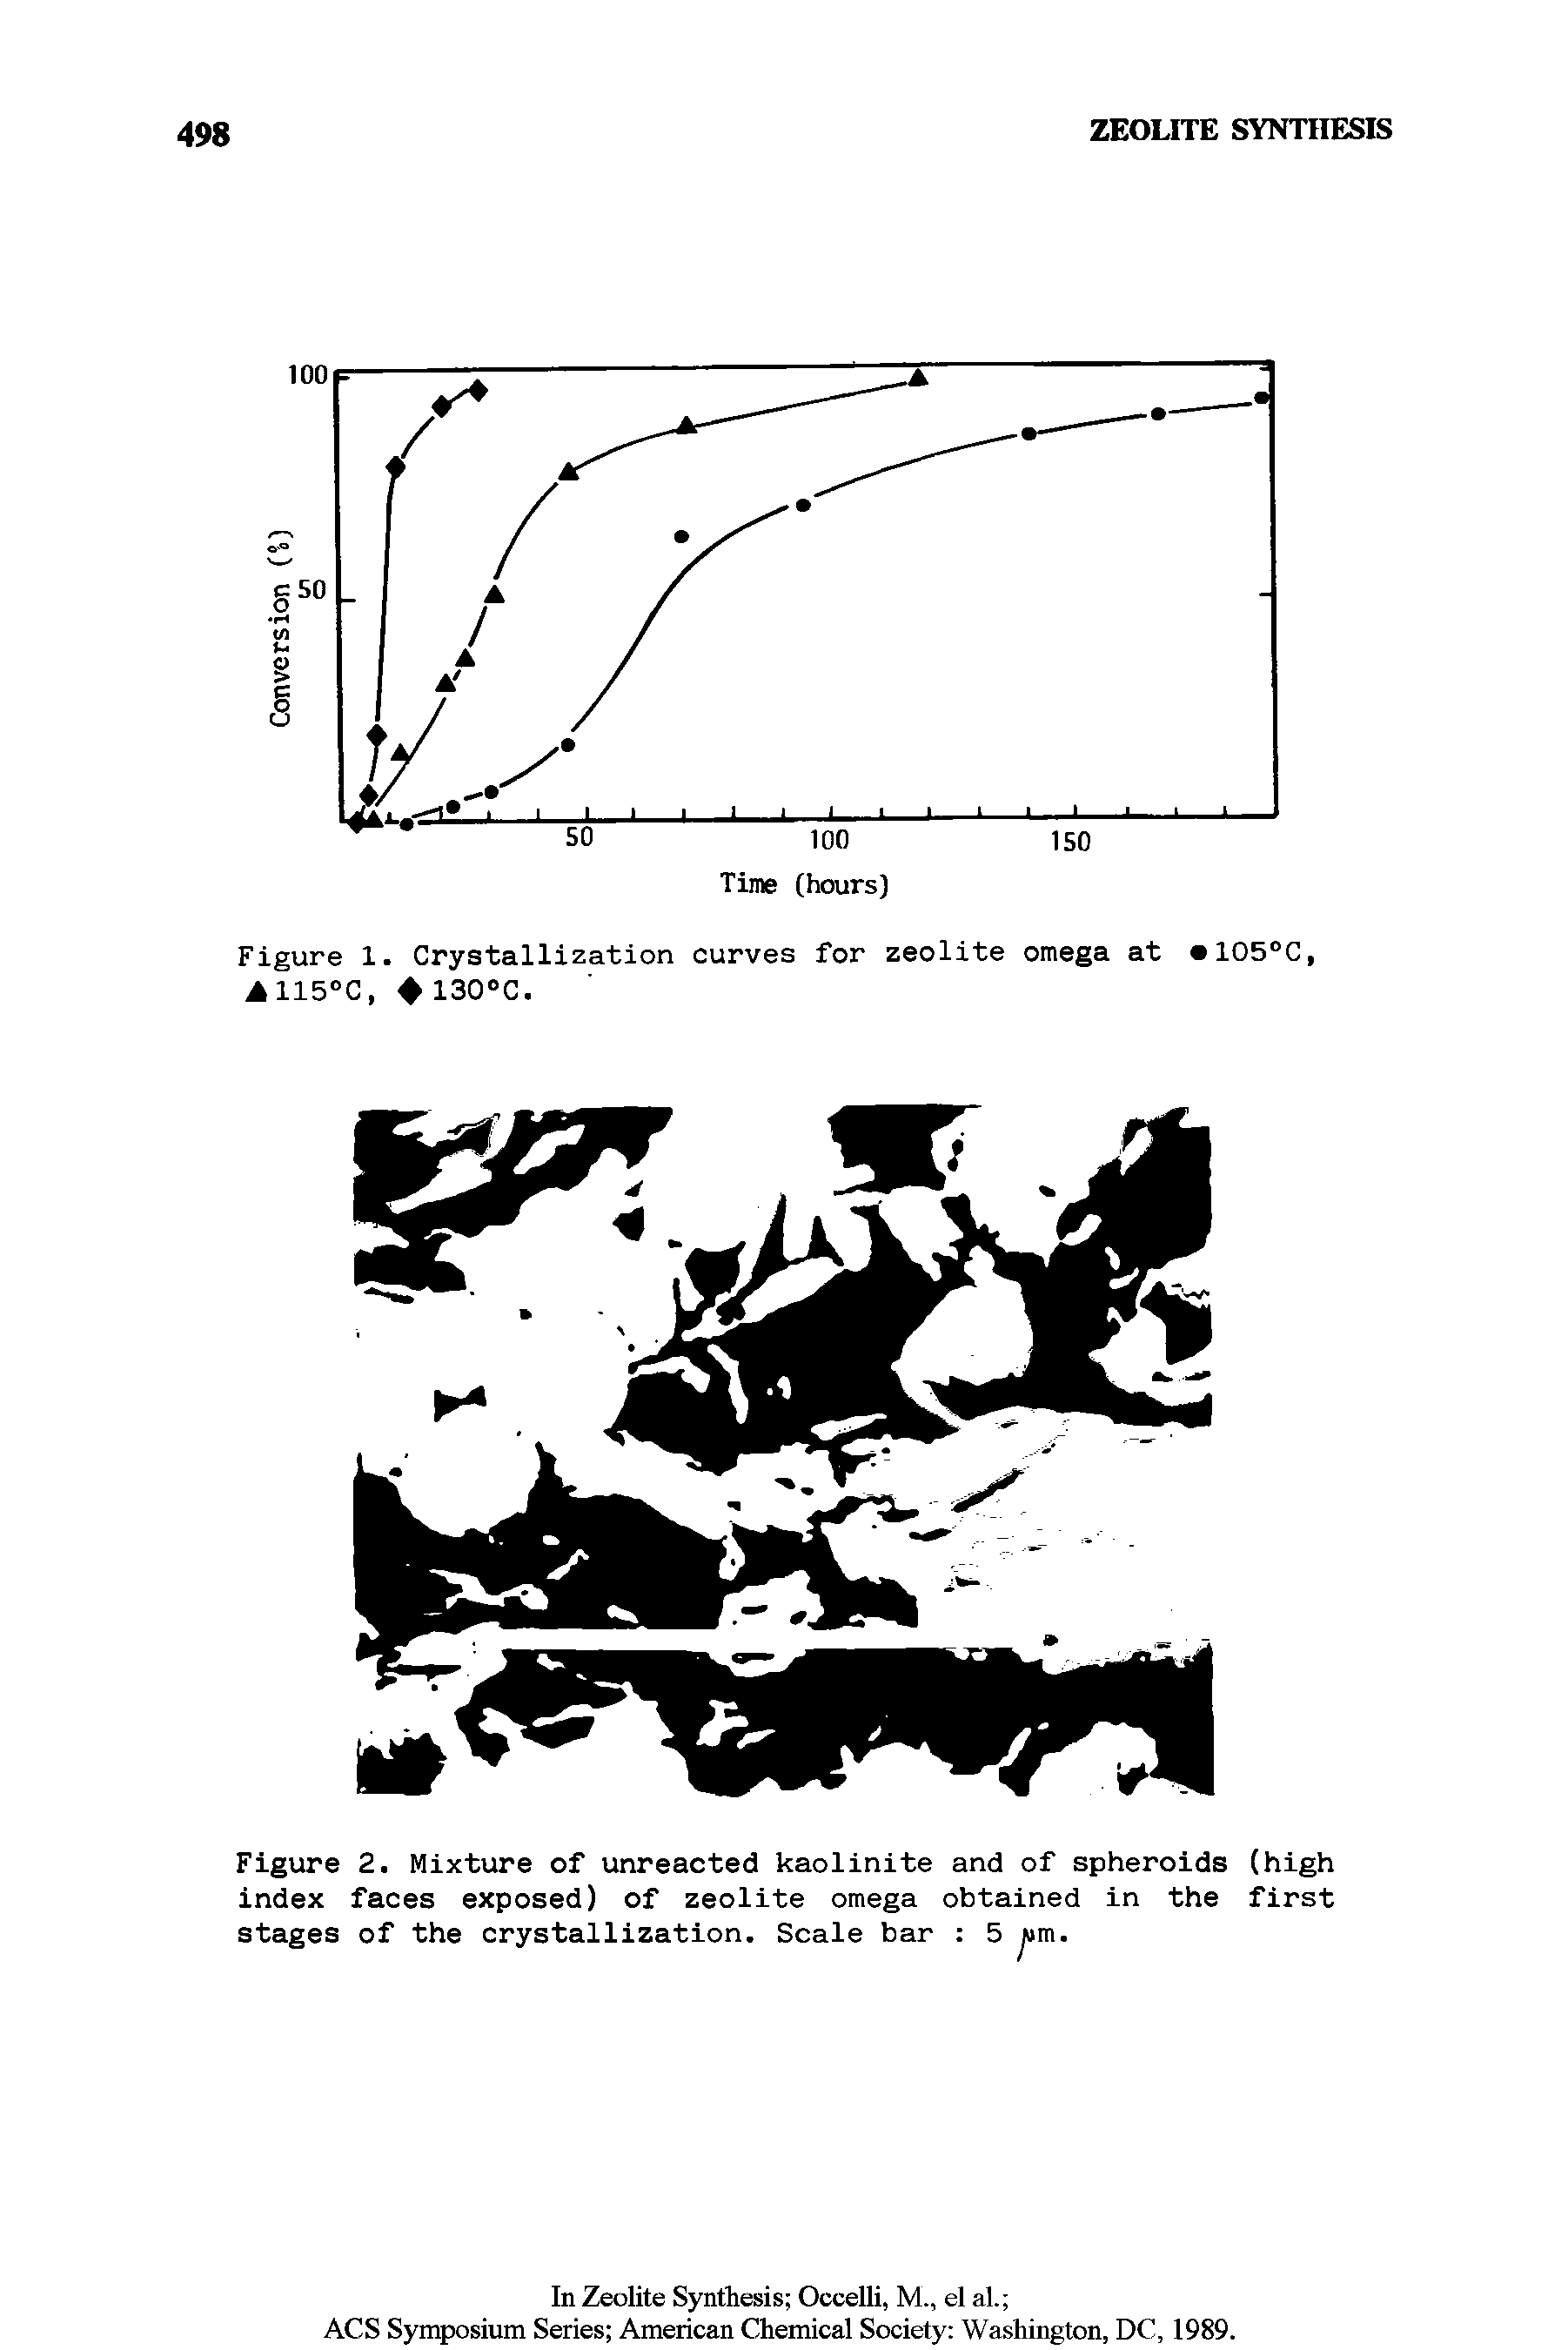 Figure 2. Mixture of unreacted kaolinite and of spheroids (high index faces exposed) of zeolite omega obtained in the first stages of the crystallization. Scale bar 5 urn.